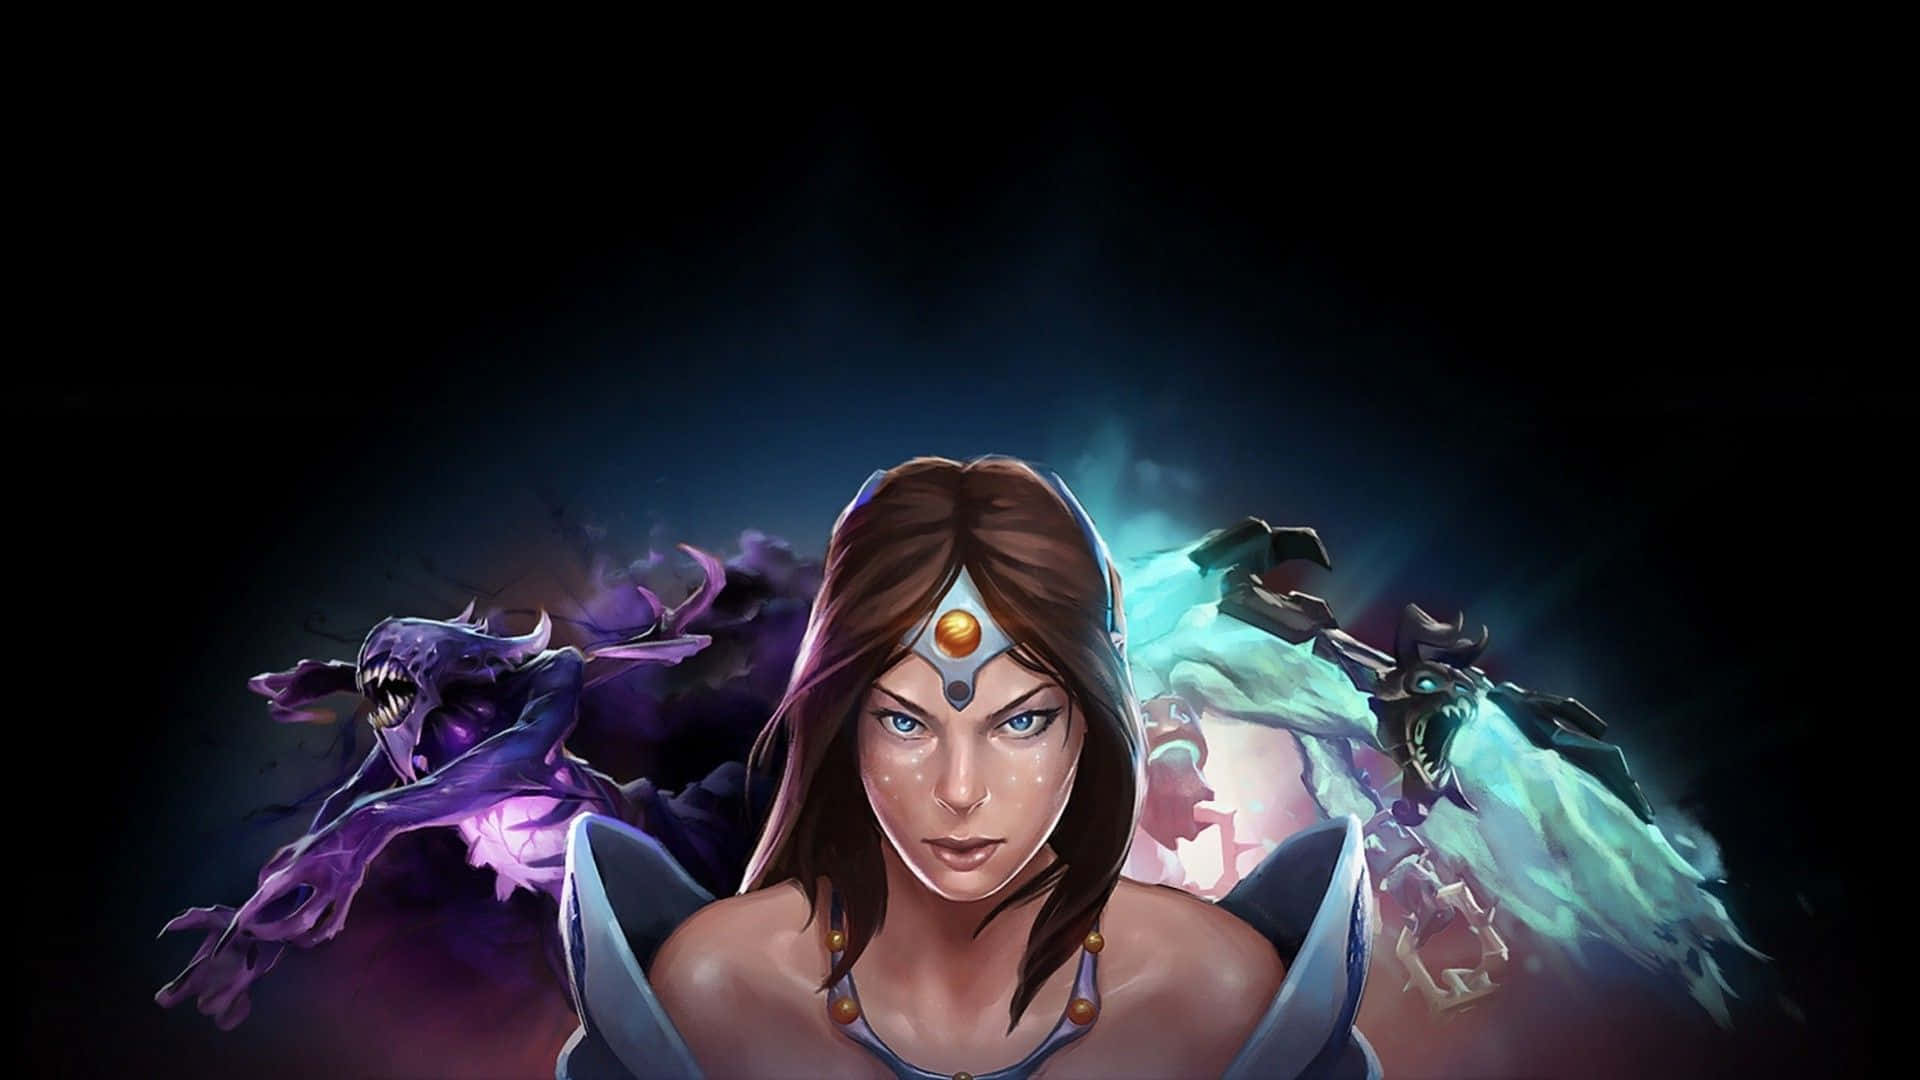 Mirana, the Queen of the Night, riding her loyal mount, Sagan, in the mystical world of Dota 2 Wallpaper